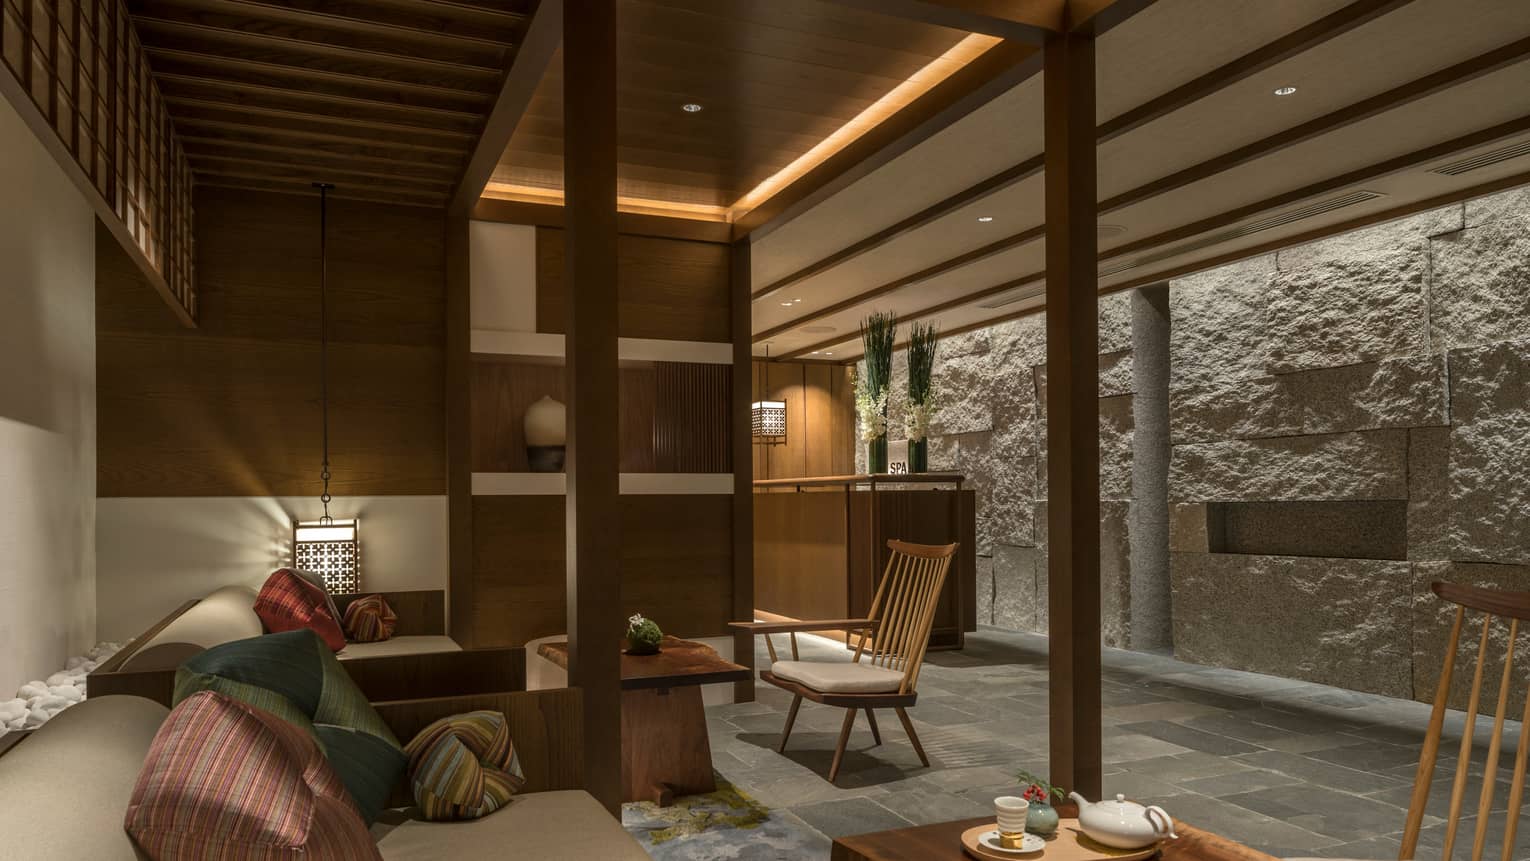 Spa lounge with plush bench, cushions, tea on table, lanterns, rock wall